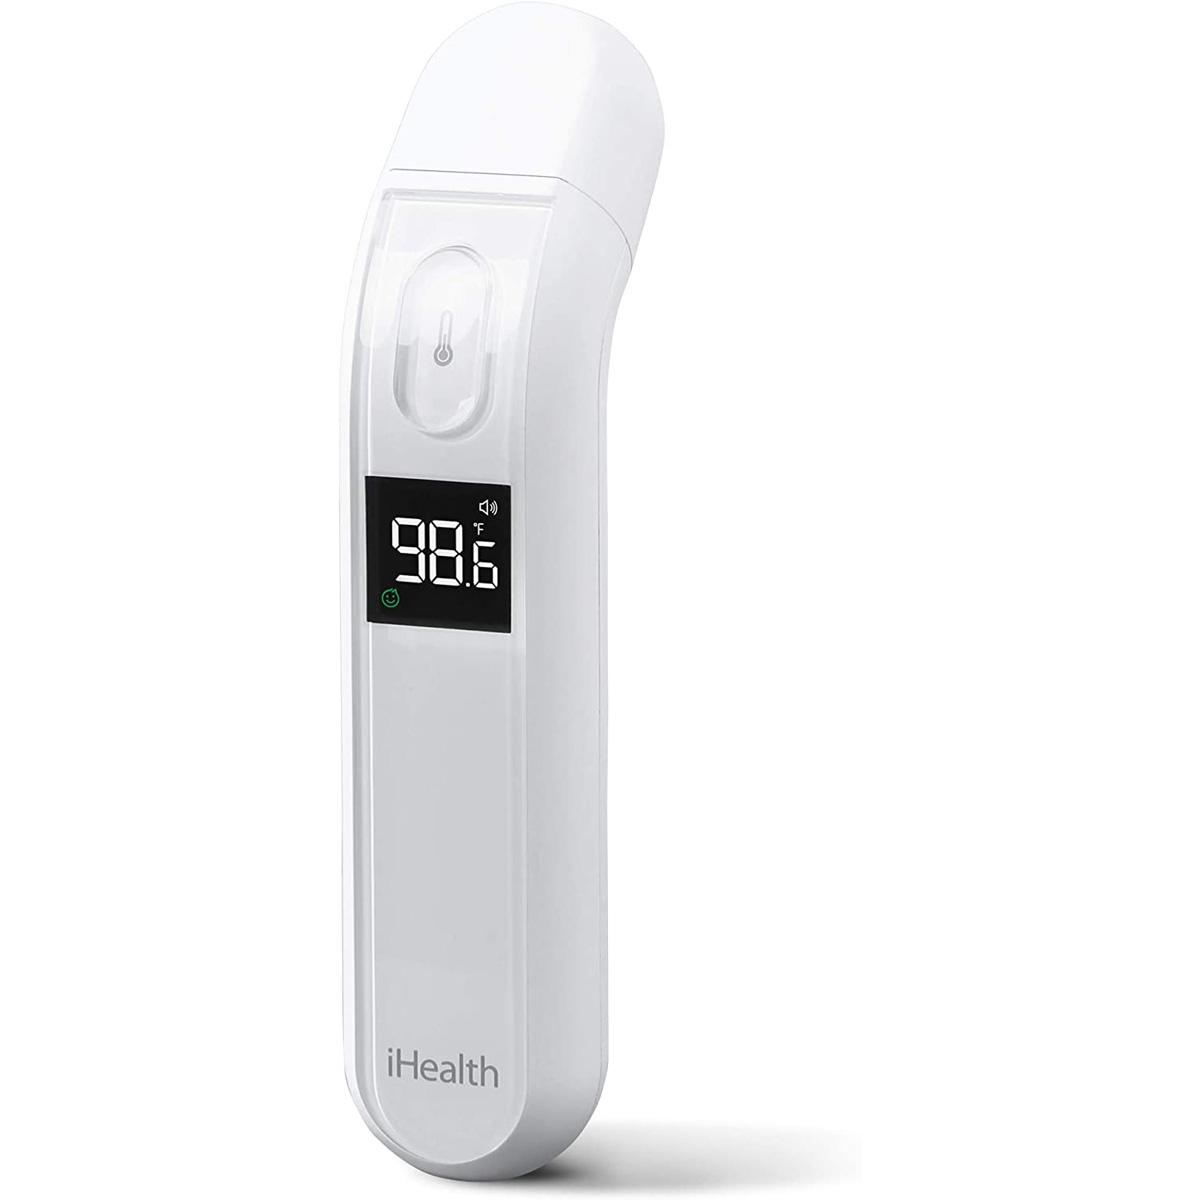 Infrared Forehead Thermometer for $19.91